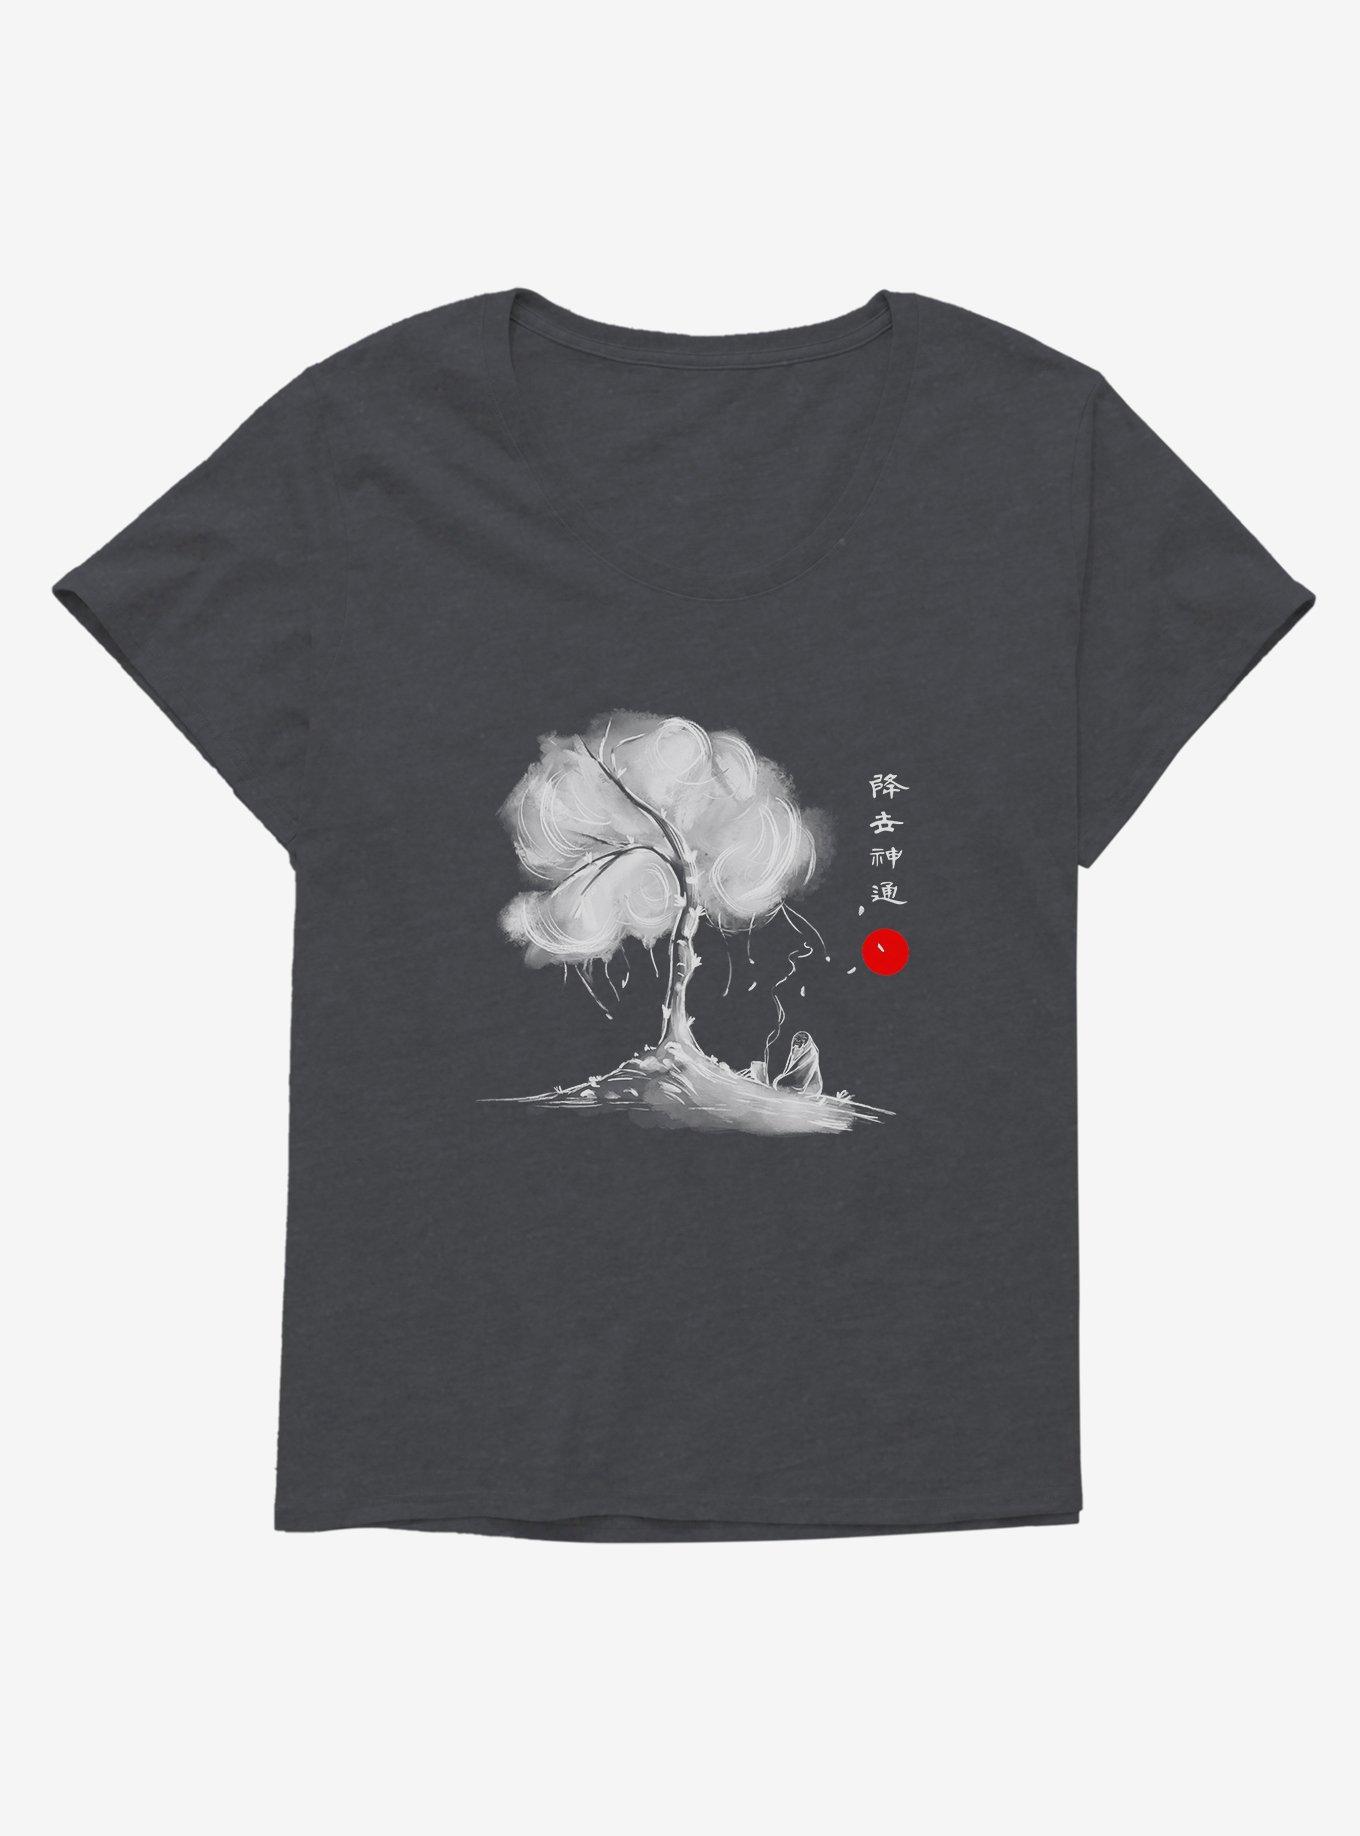 Avatar: The Last Airbender Leaves From Vine Girls T-Shirt Plus